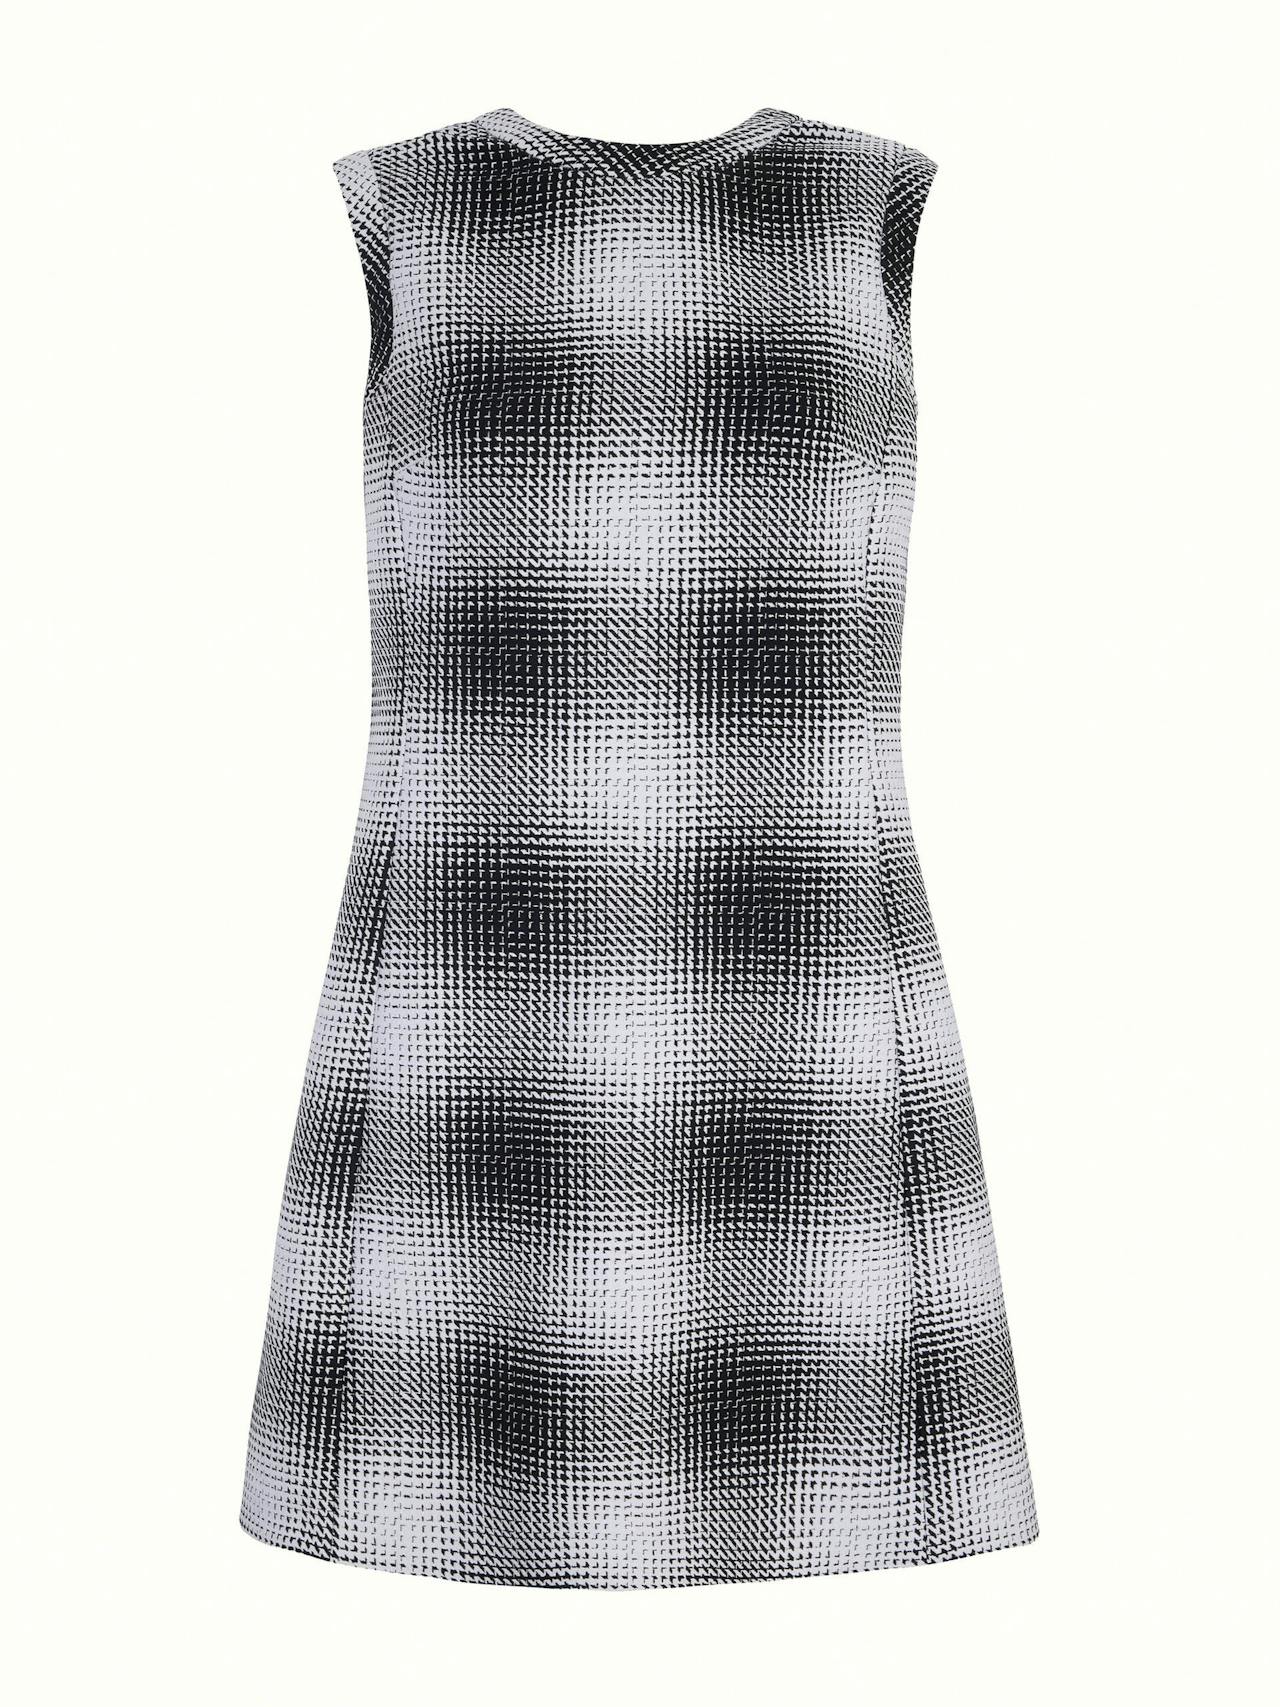 Emmy dress in black and white checked cloque